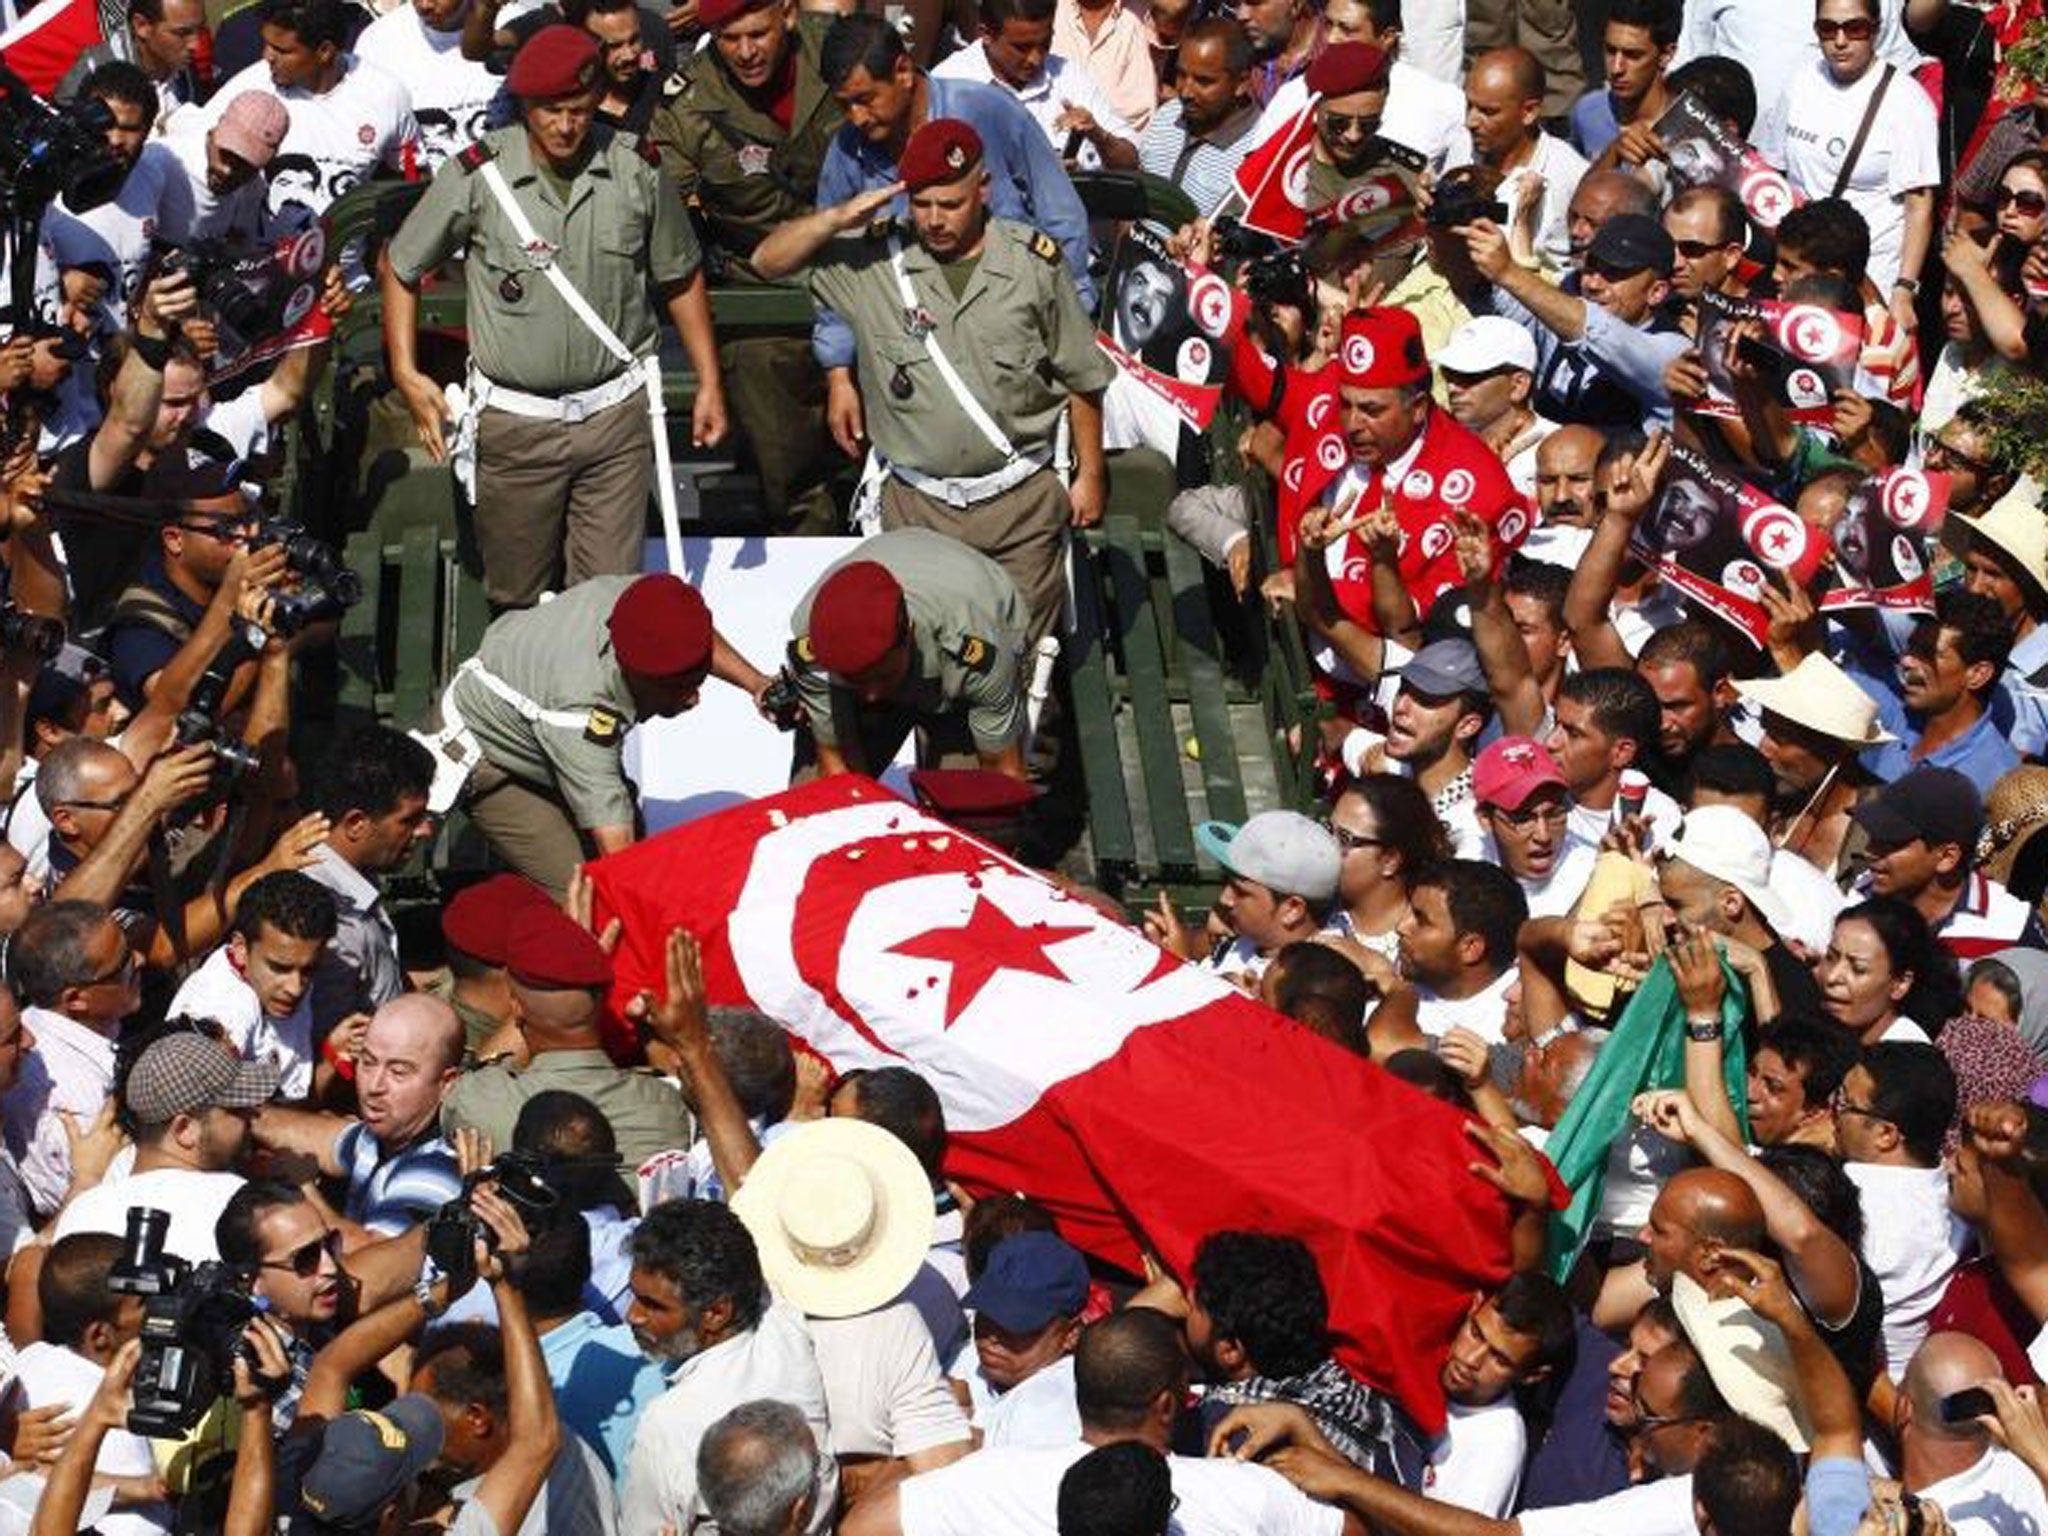 Mourners carry the coffin of murdered opposition leader Mohamed Brahmi during his funeral procession on Saturday